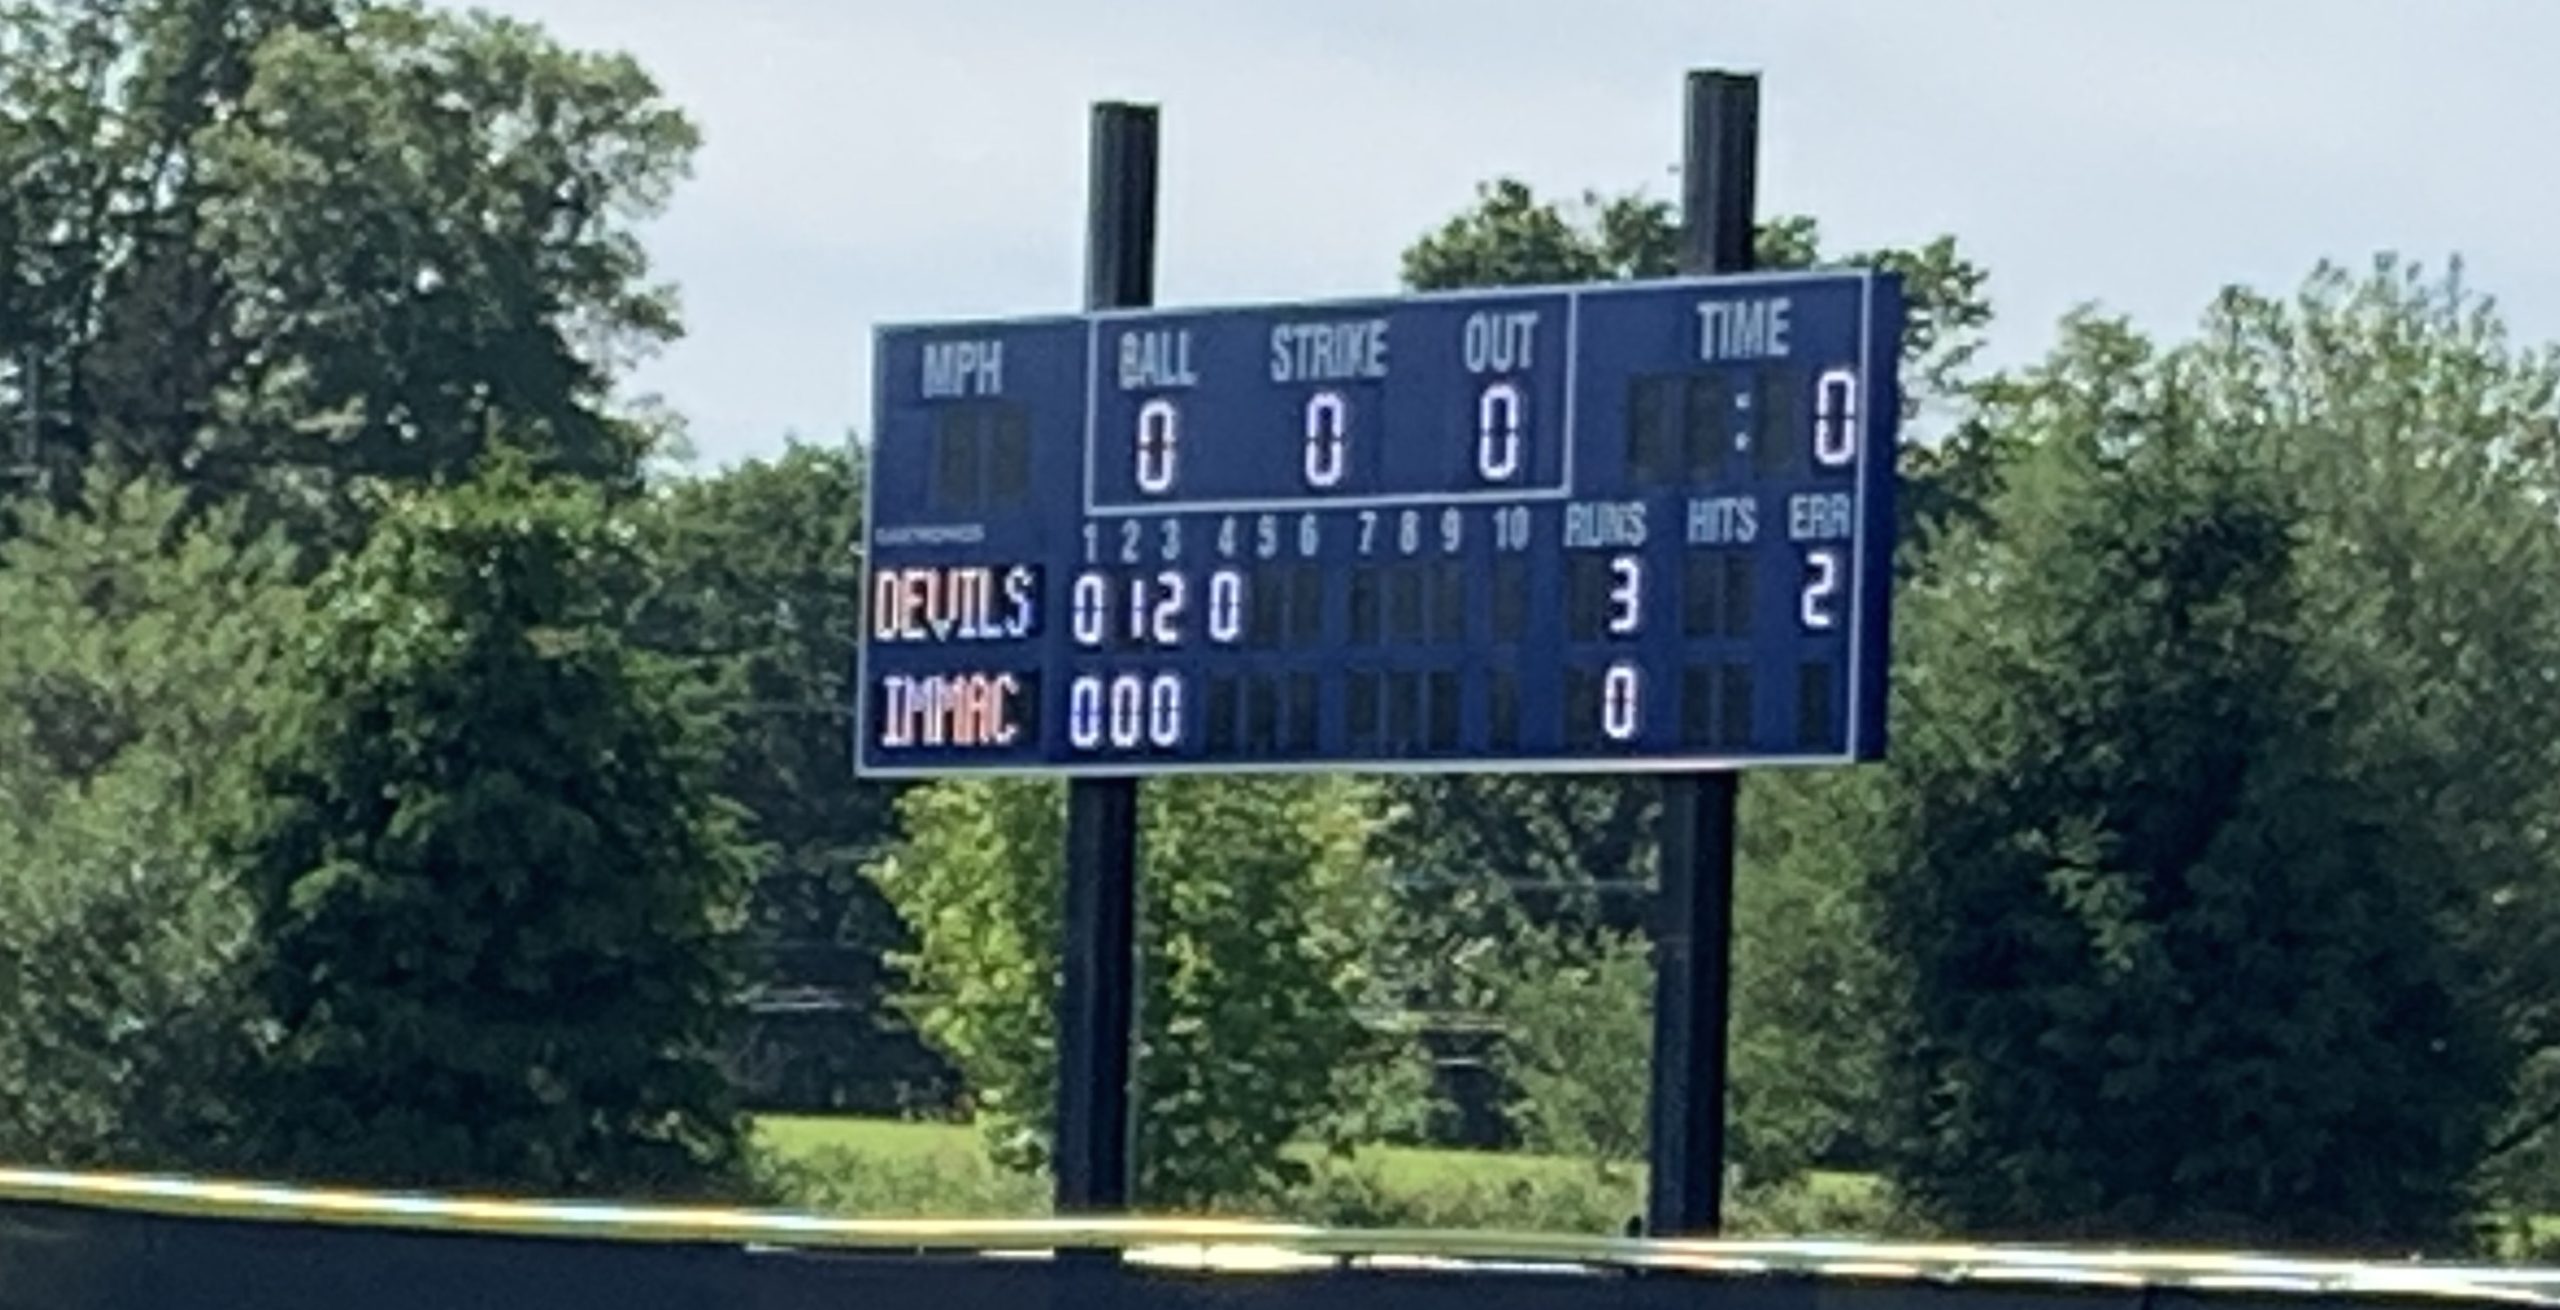 New scoreboards in place as upgrades continue at Diamond Nation